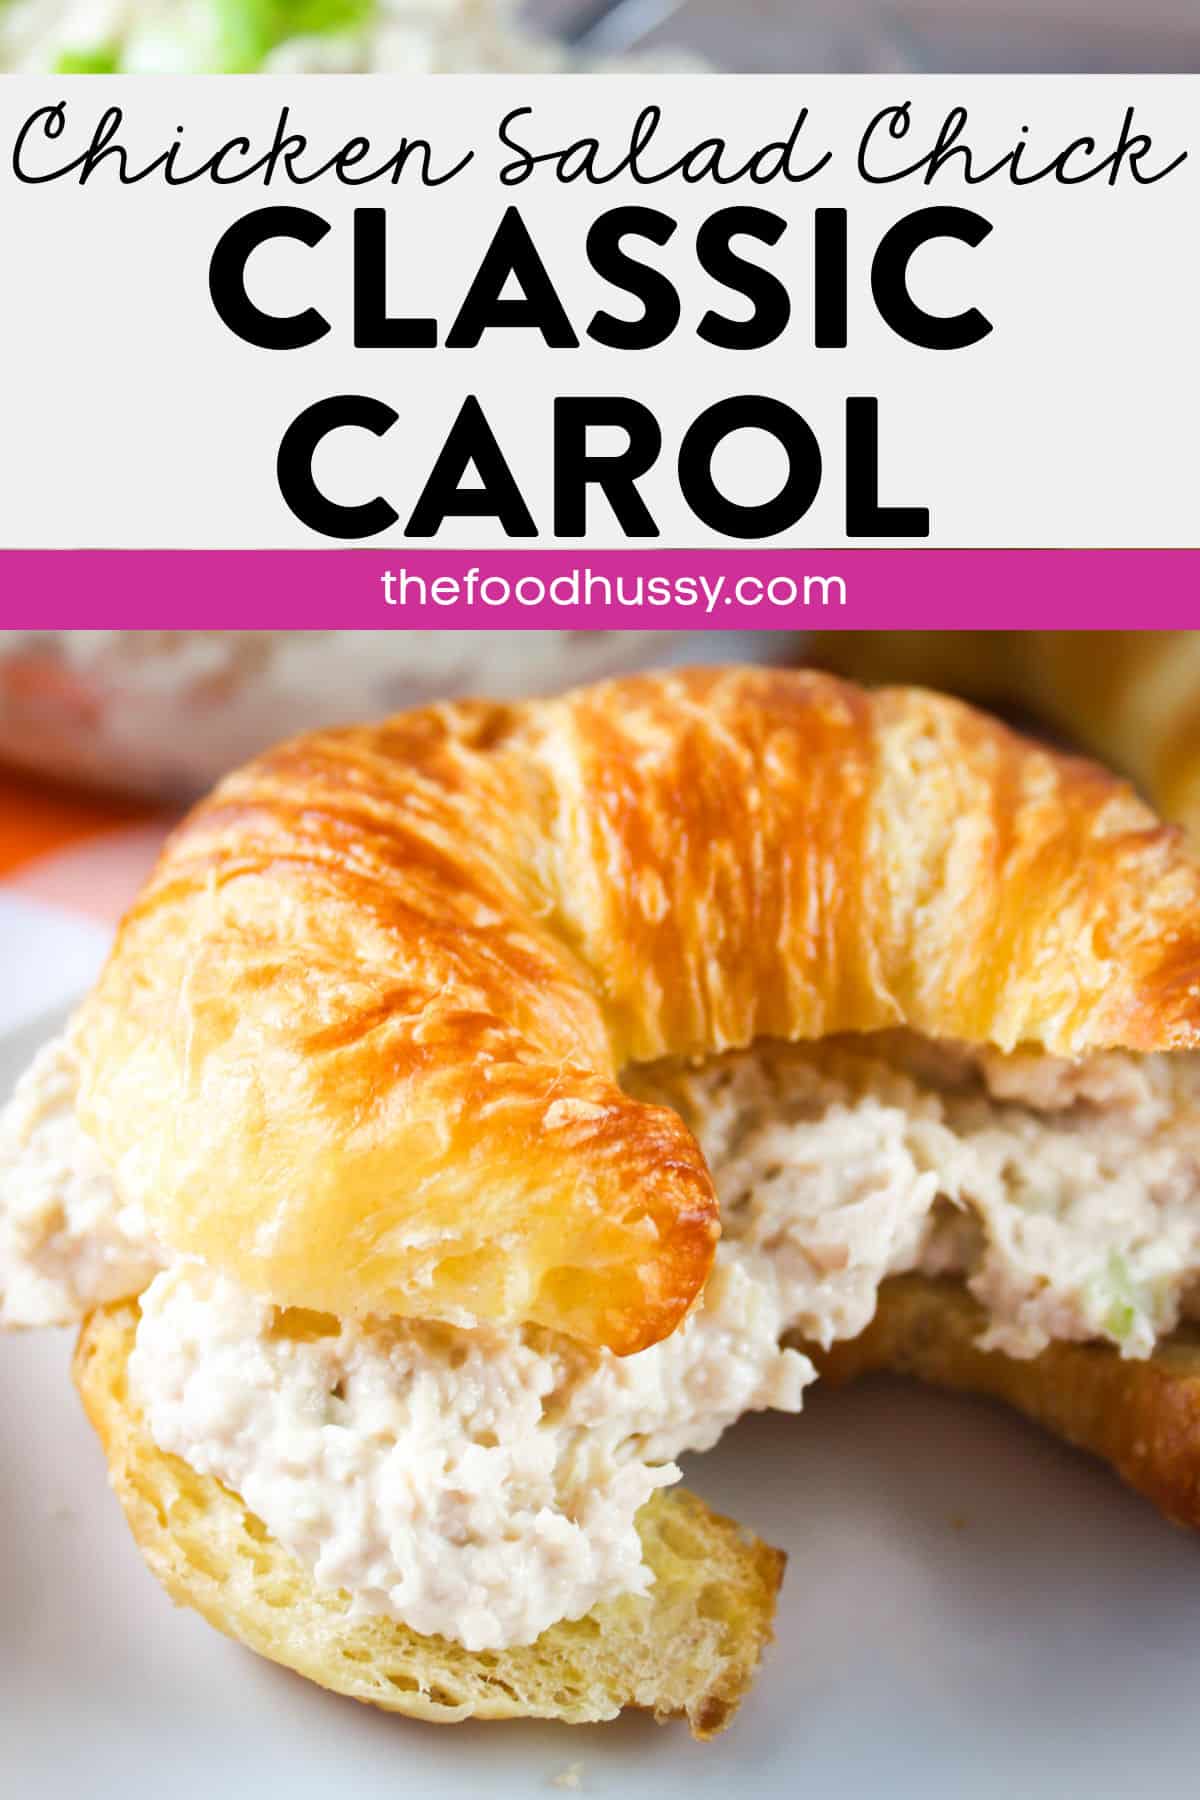 The Classic Carol chicken salad from Chicken Salad Chick is their first and most basic chicken salad. No frills here - just delicious white meat chicken, celery, mayo and a touch of their "secret" seasoning! via @foodhussy